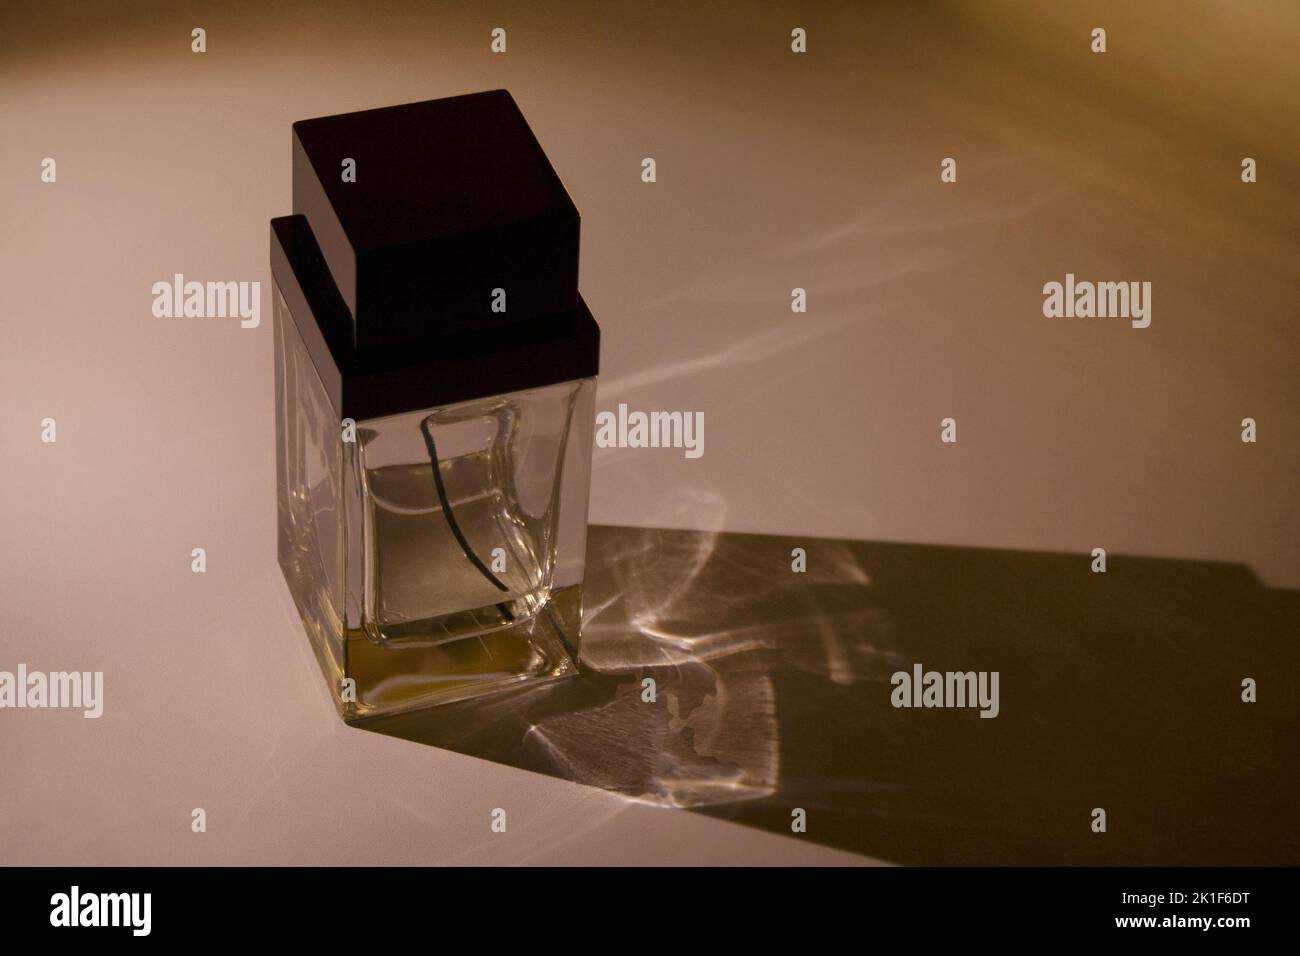 Glass perfume bottle container with a long shadow on dark background Stock Photo